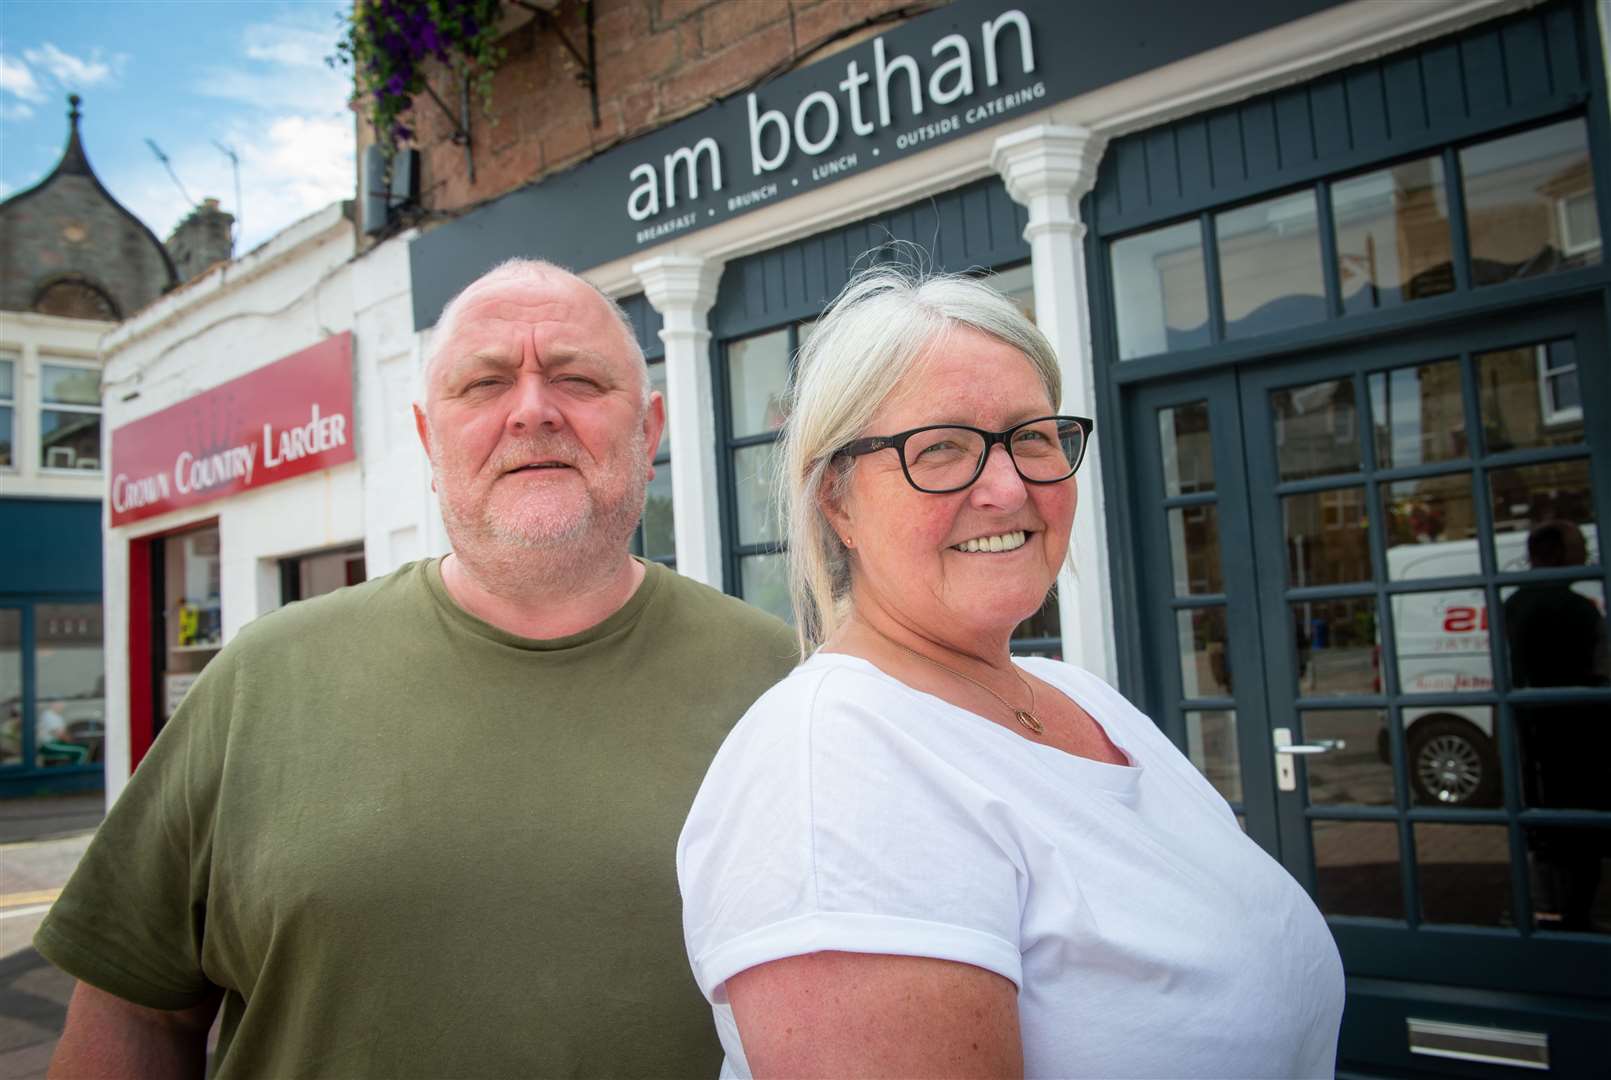 The former Olive Grove Café in Crown has been taken over by Dave and Anne Marie McLeod, and is now called Am Bothan.